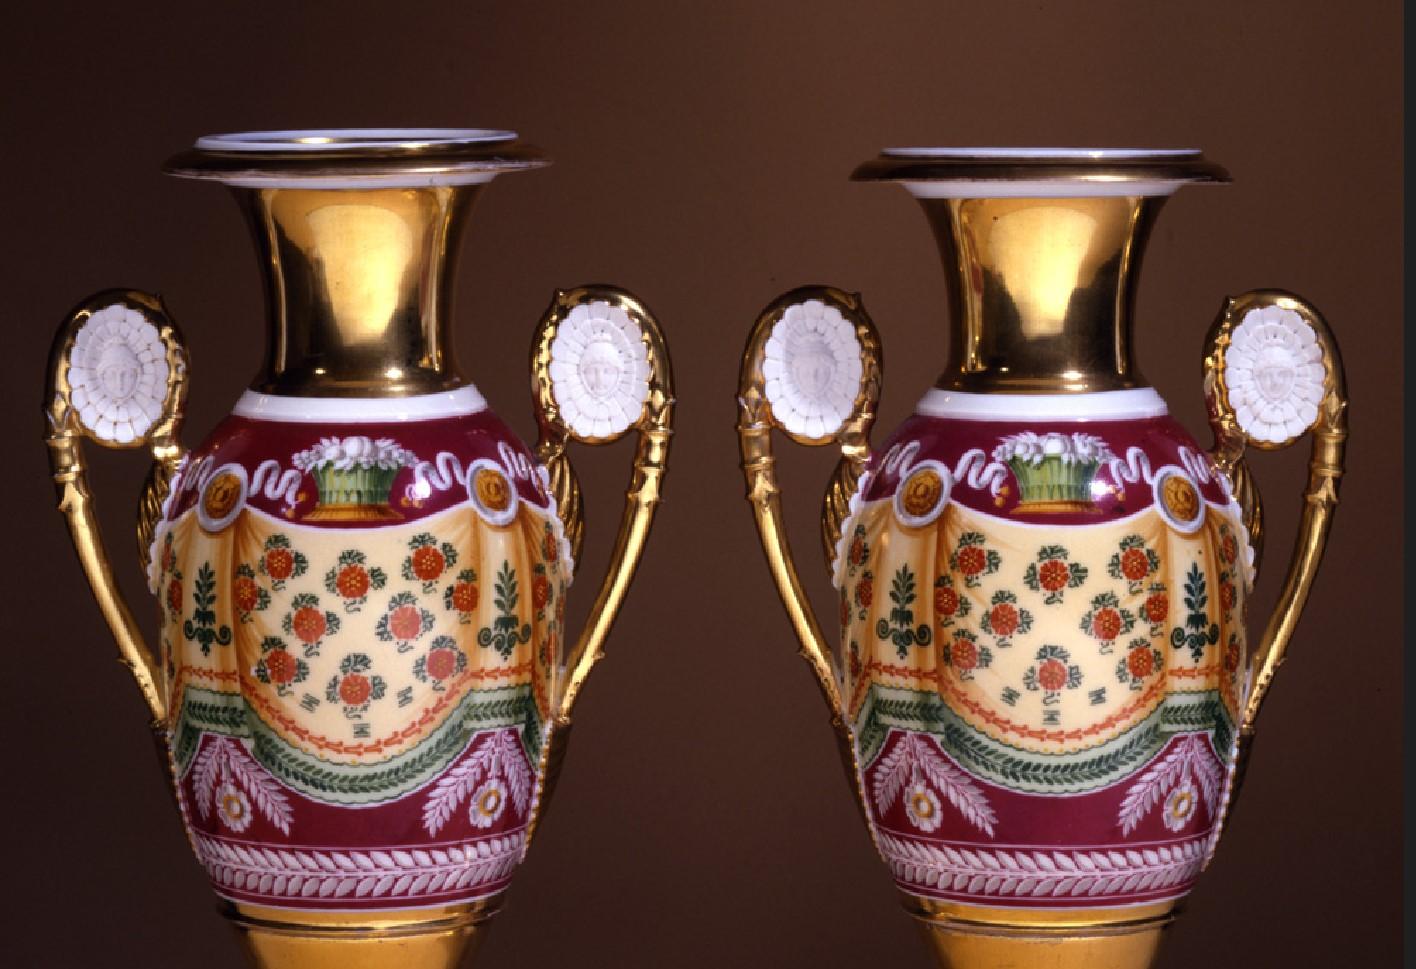 French
Pair “Old Paris” Porcelain Vases with Drapery Decoration, about 1820
Porcelain, painted and gilded
13 1/16 in. high

CONDITION:  Small repair to one handle of one vase.  A small chip on the upper rim of the lower section of the second